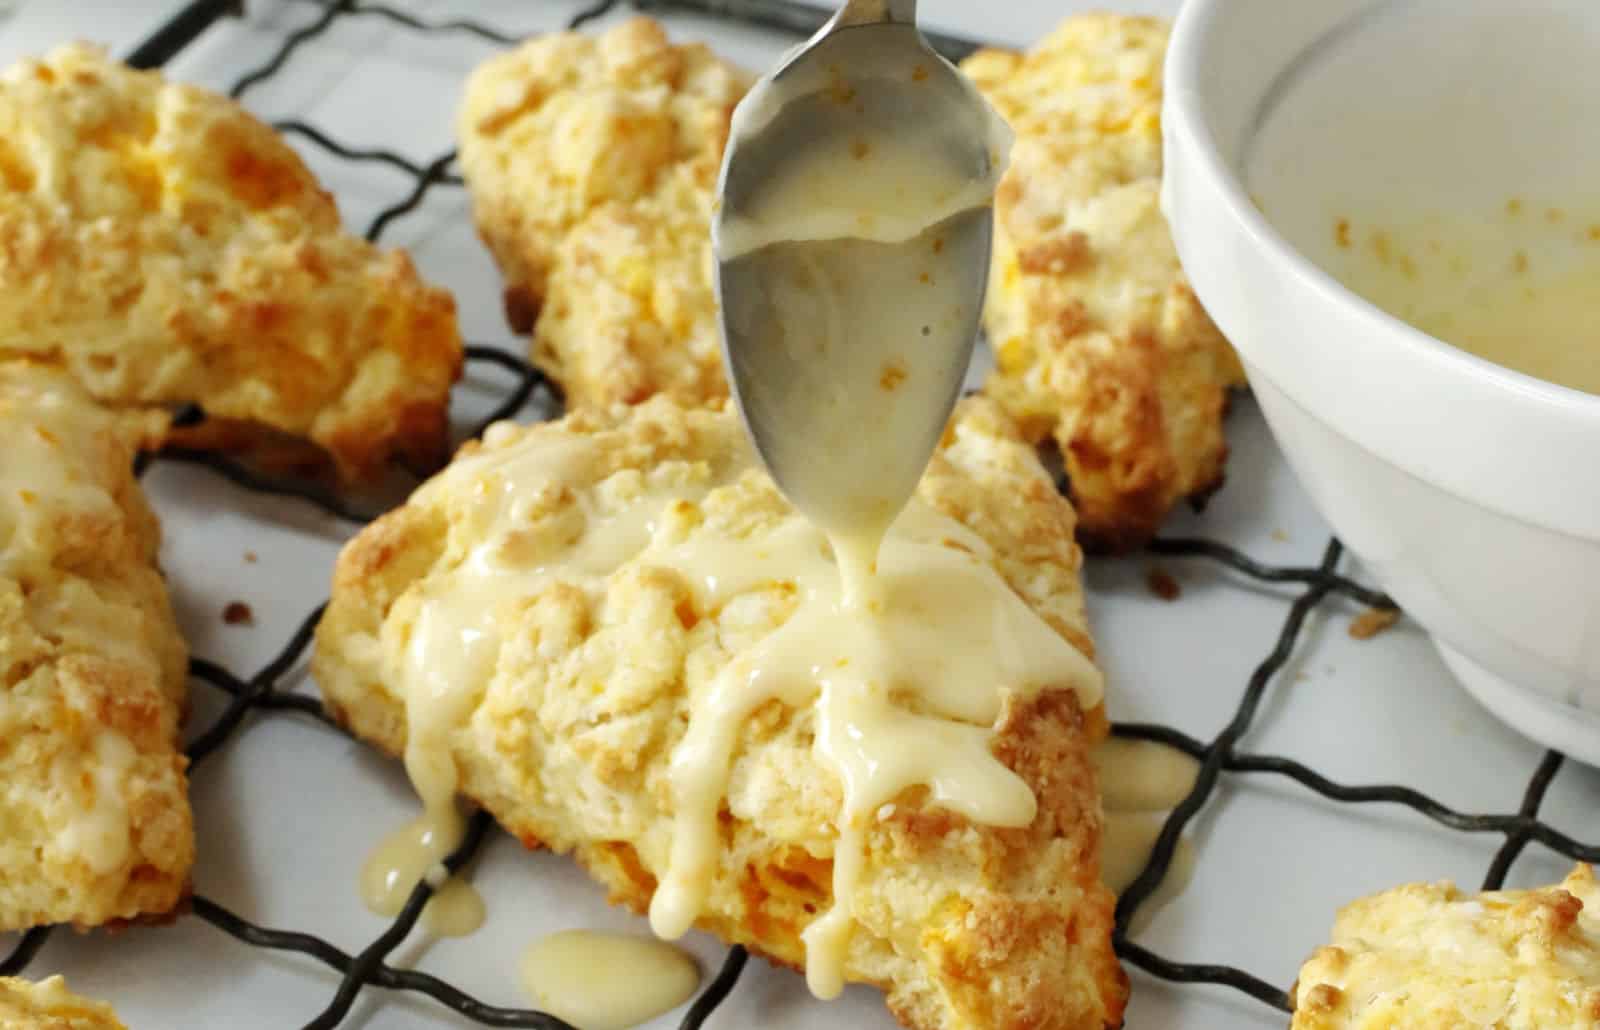 Scones being drizzled with icing on a cooling rack.